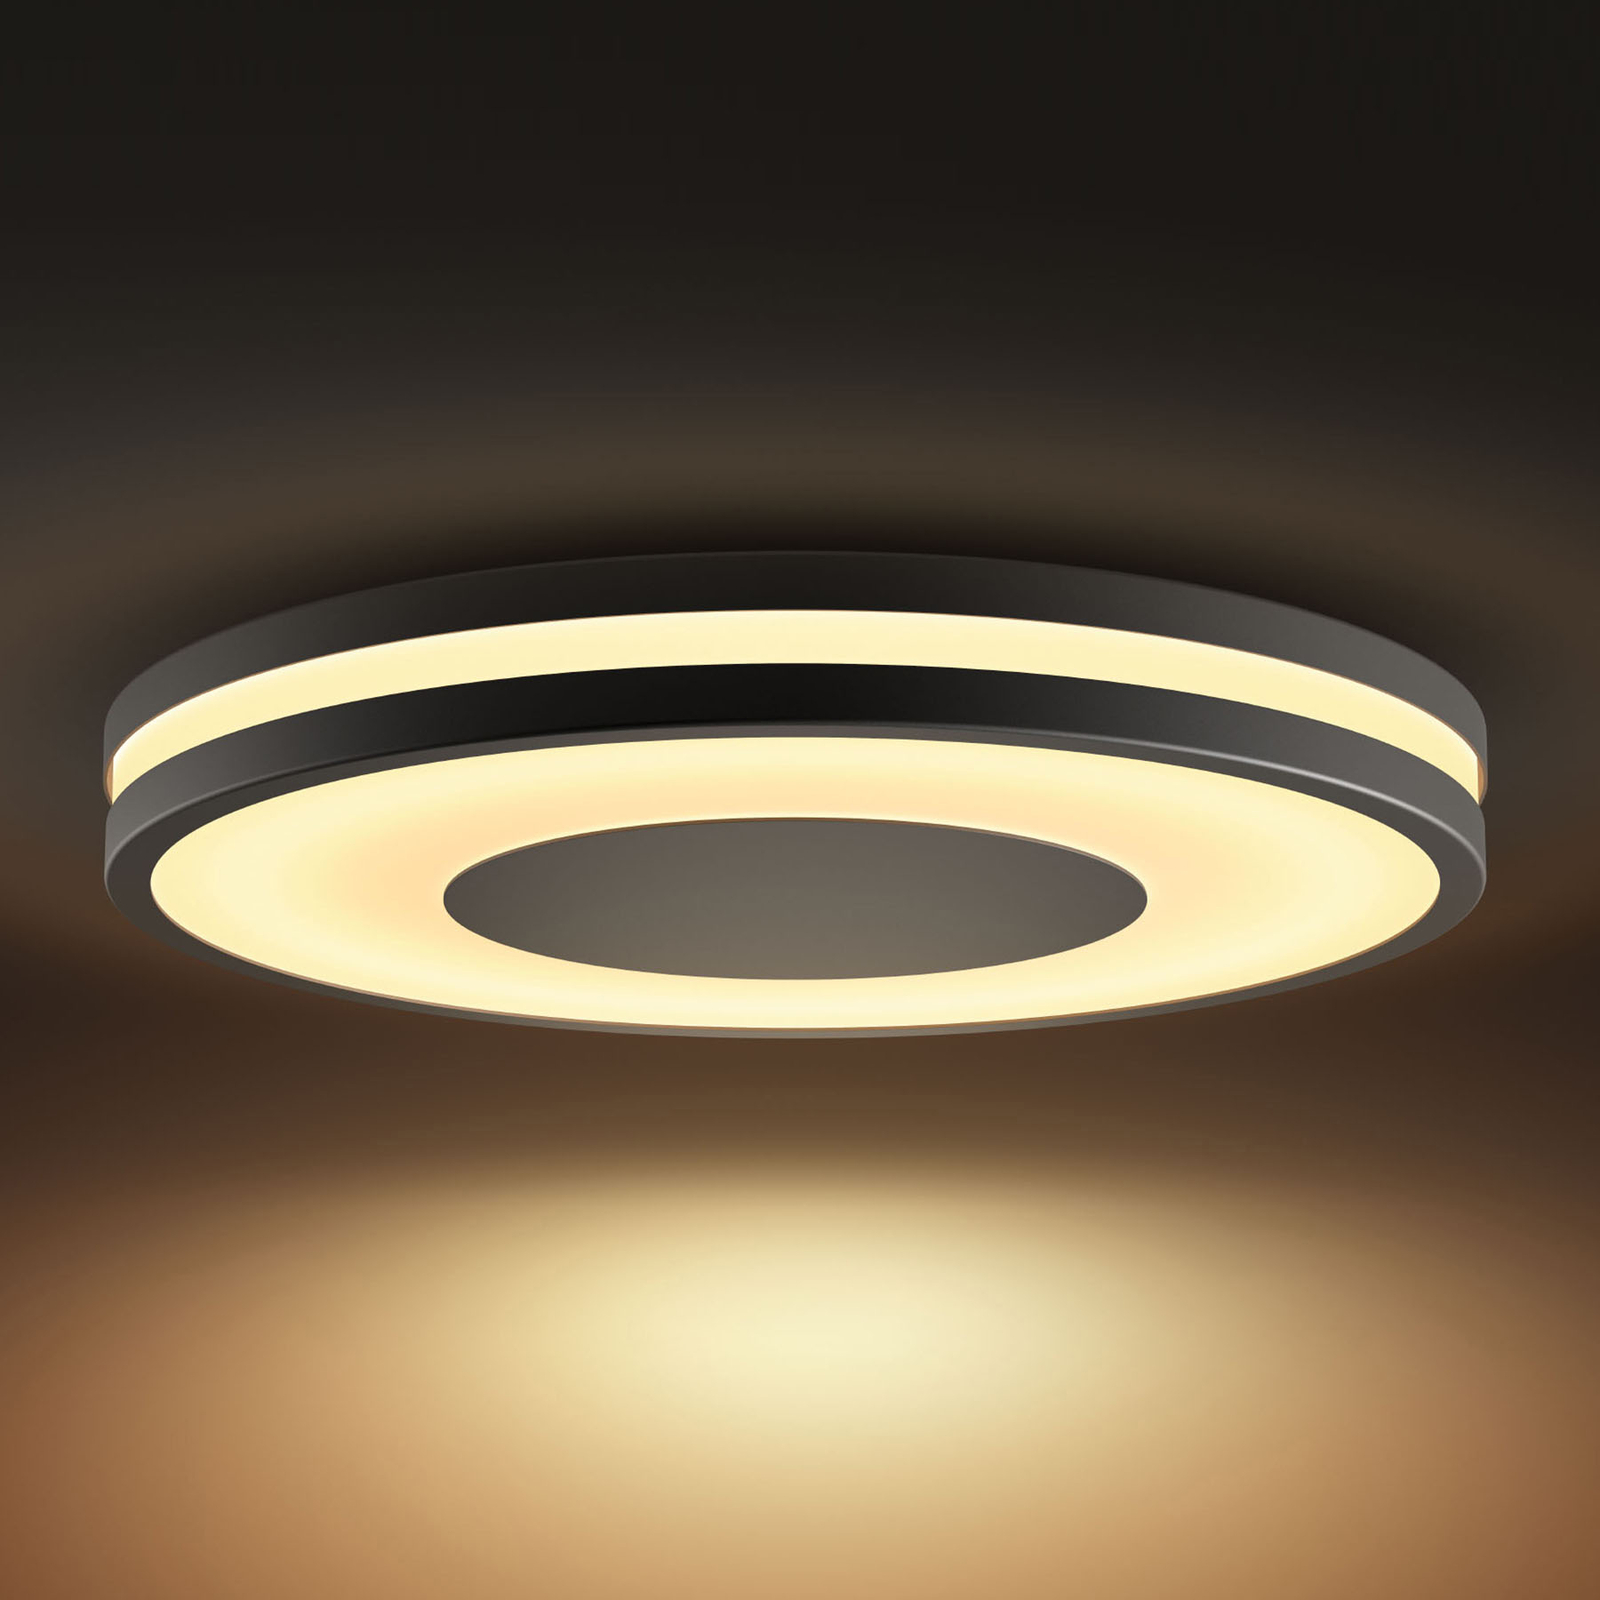 Philips Hue Ambiance Being zwart | Lampen24.be